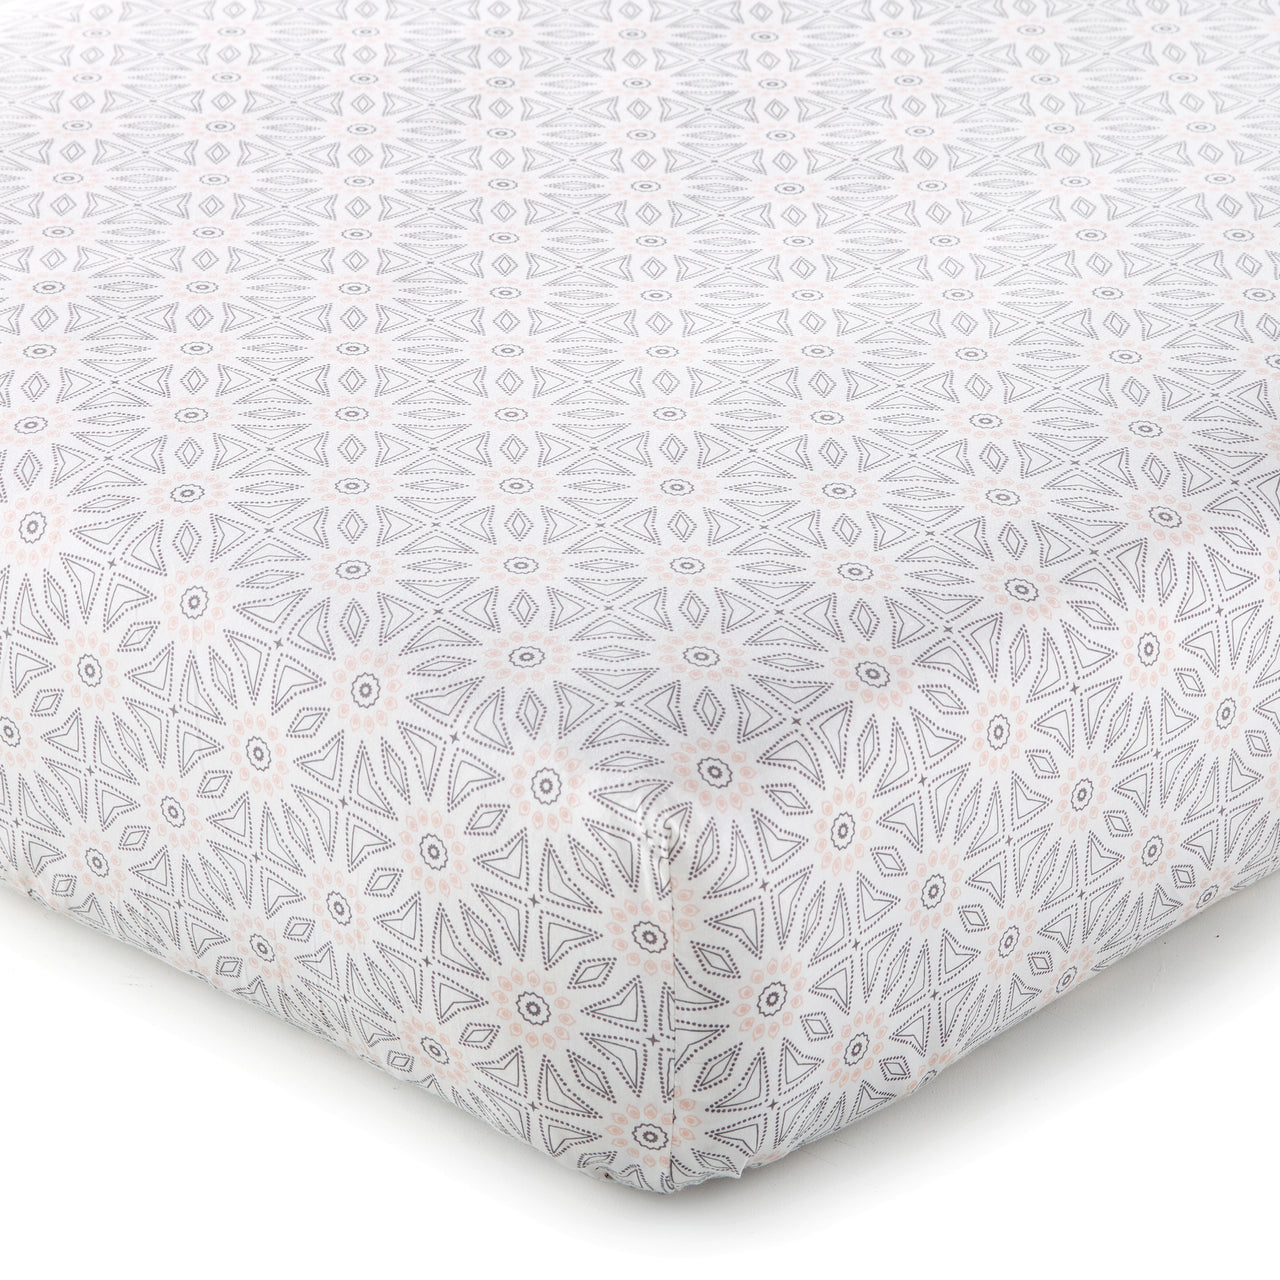 Levtex Baby Imani Medallion Fitted Crib Sheet